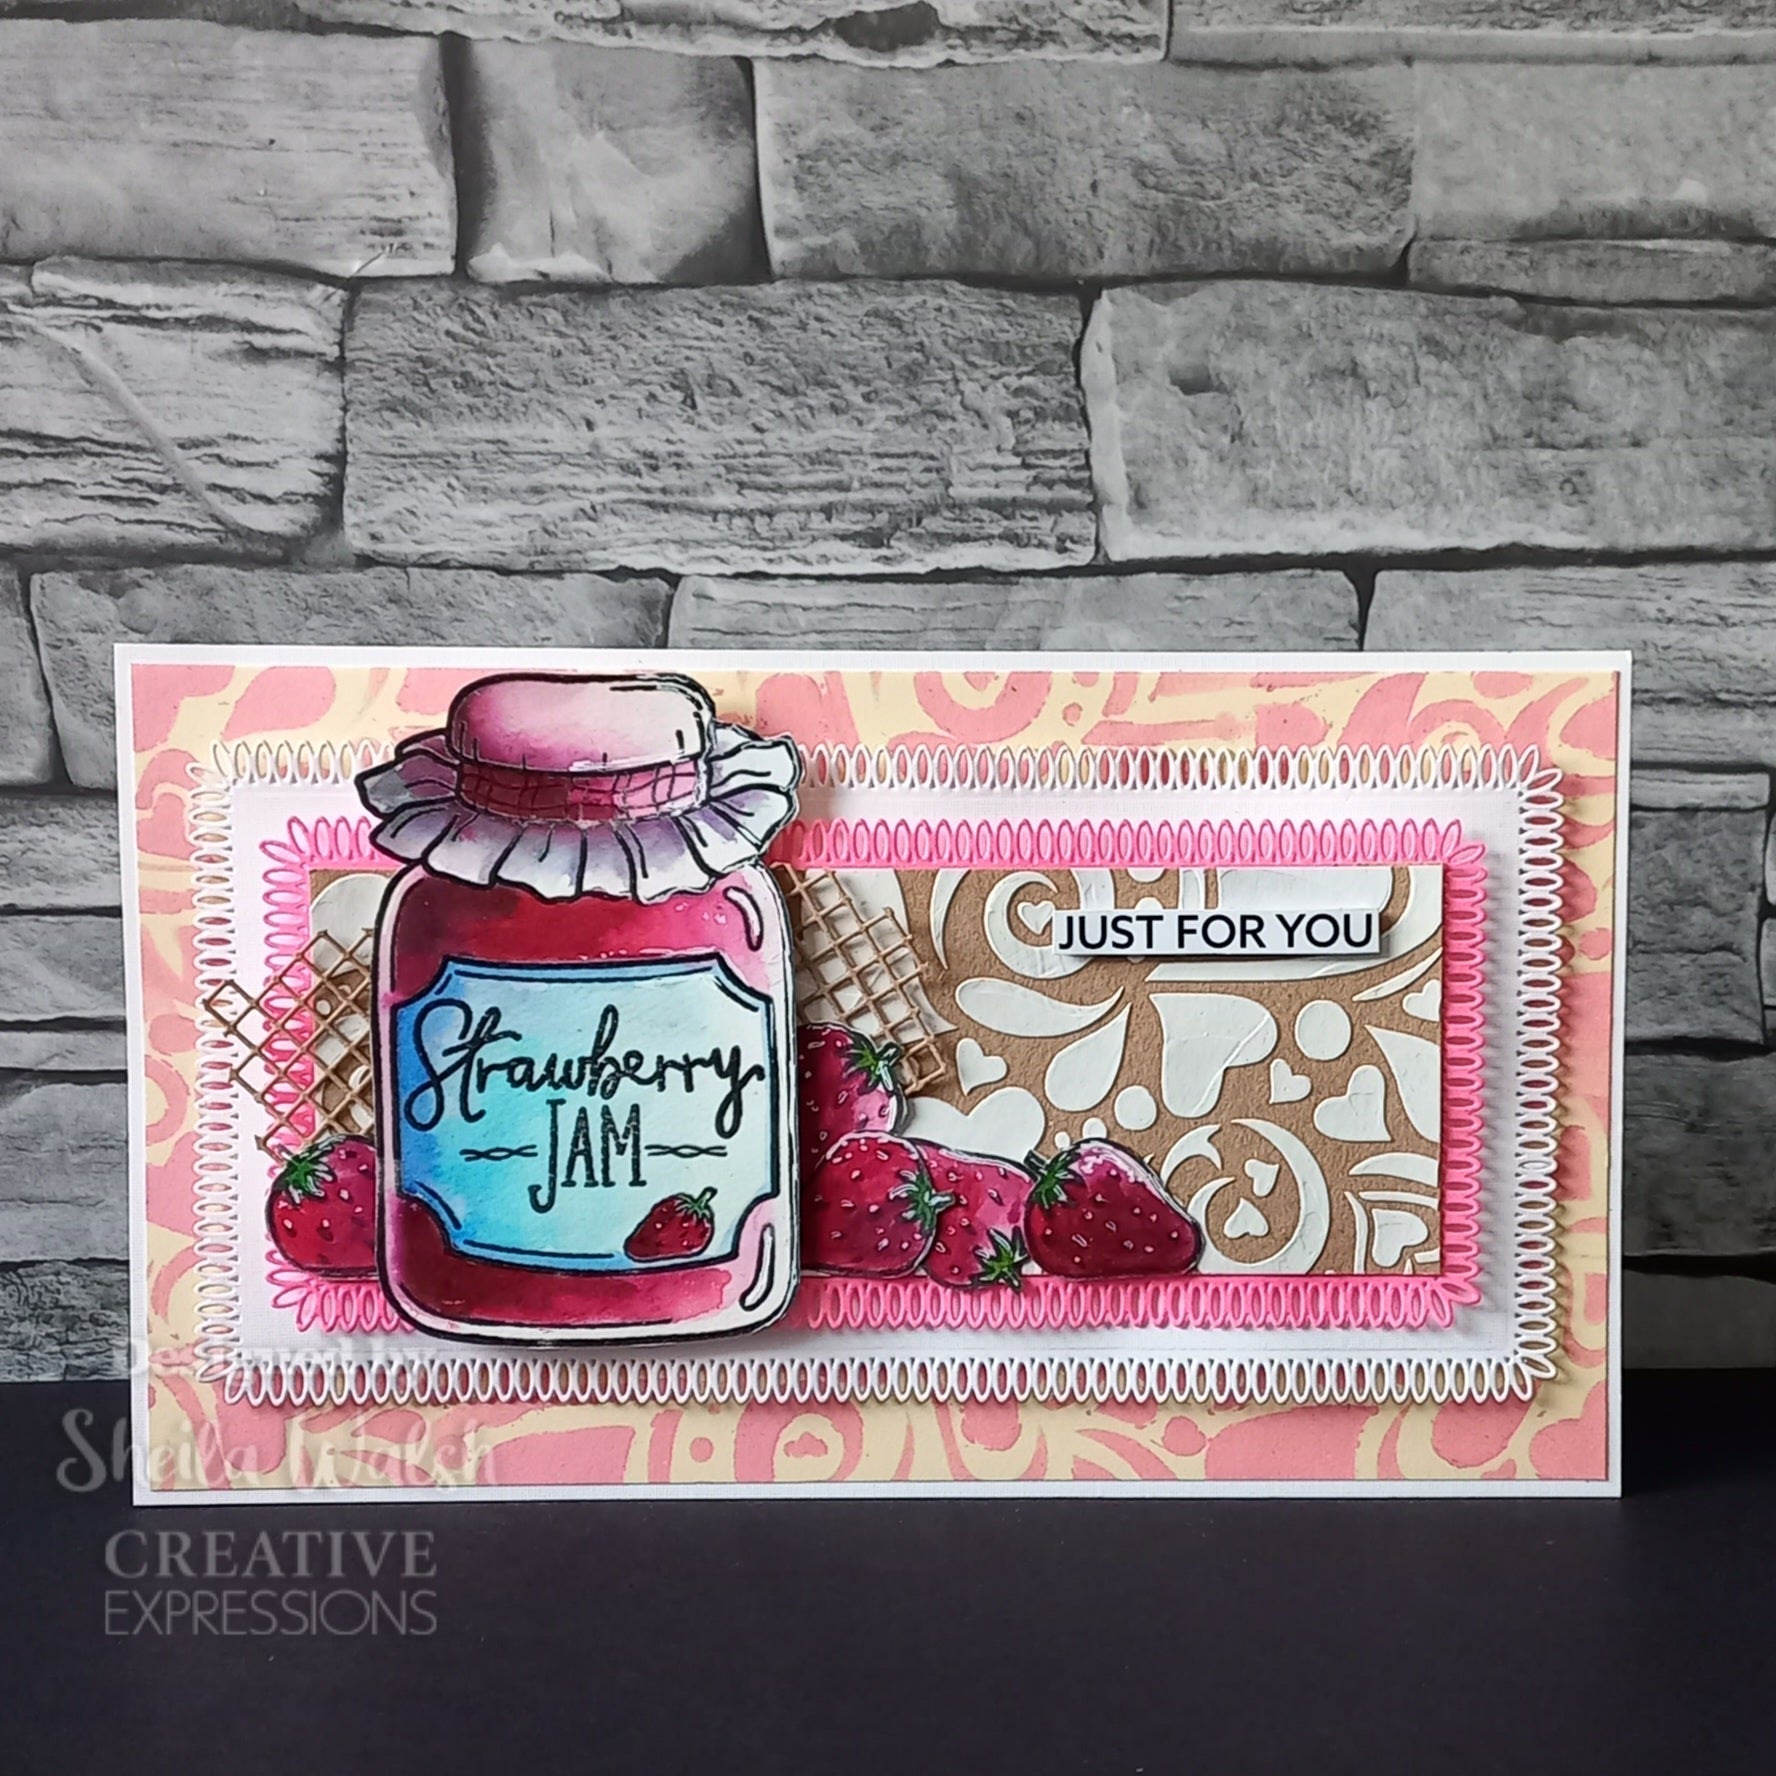 Creative Expressions Swirling Hearts DL Stencil 4 in x 8 in (10.0 x 20.3 cm)